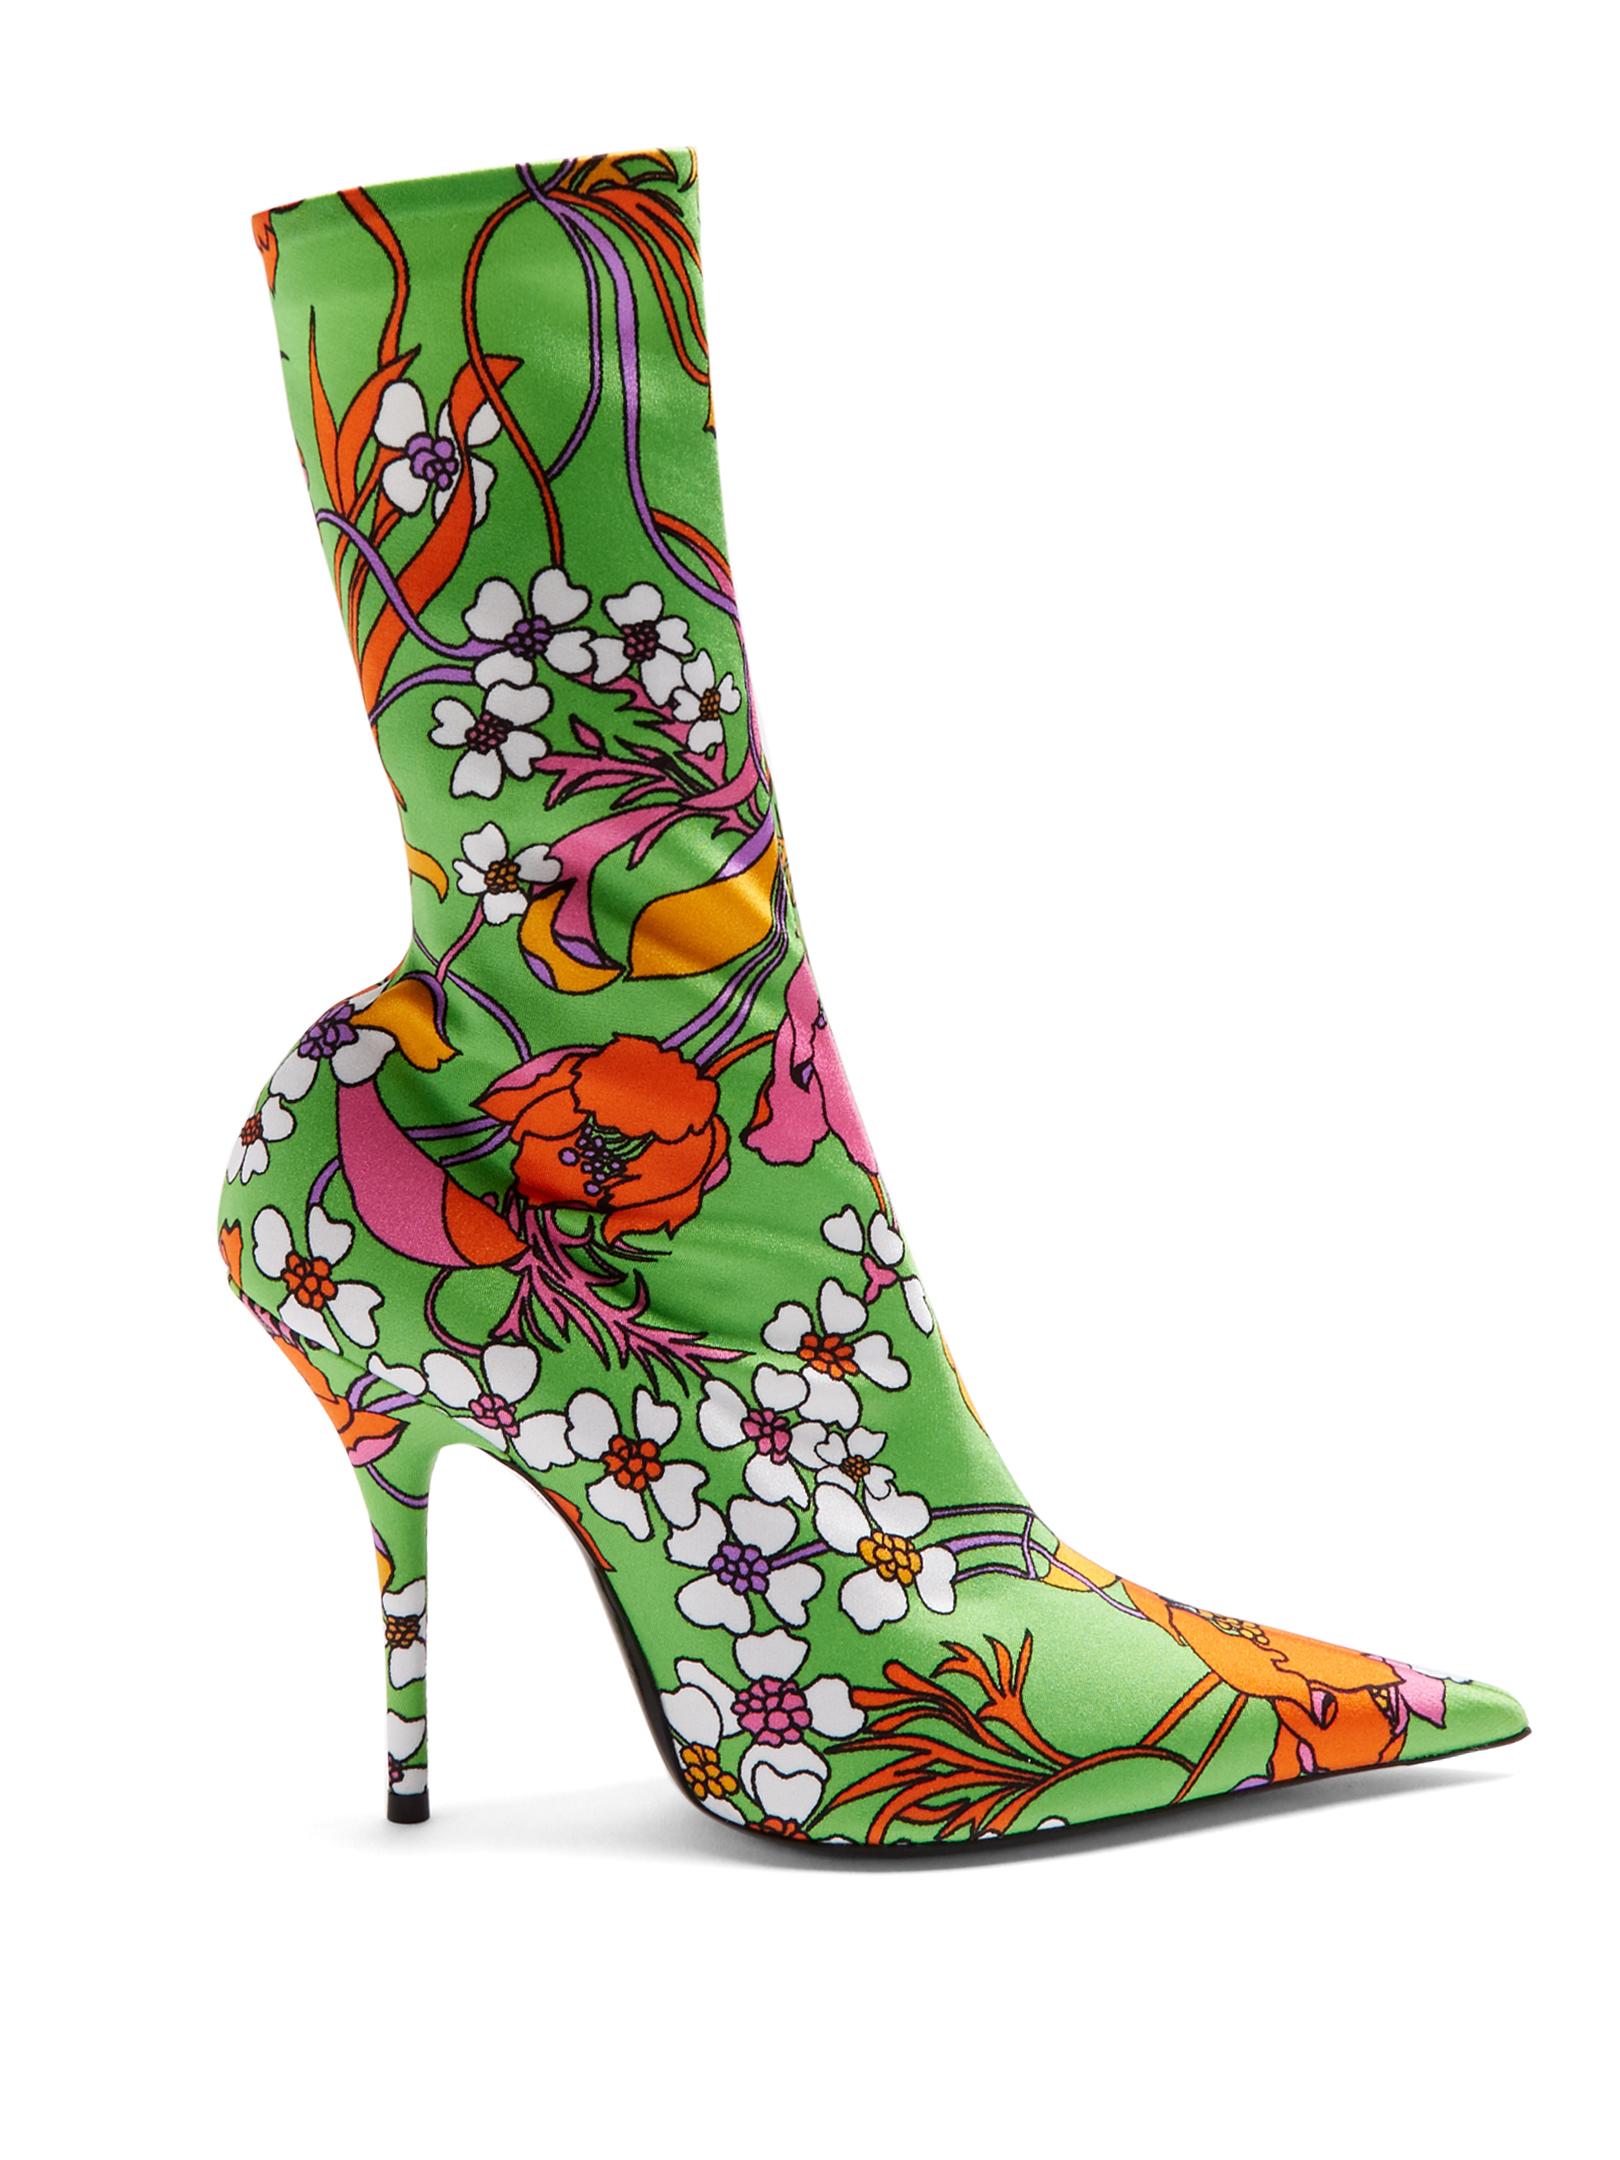 Balenciaga Knife Floral-print Jersey Sock Boots in Green | Lyst